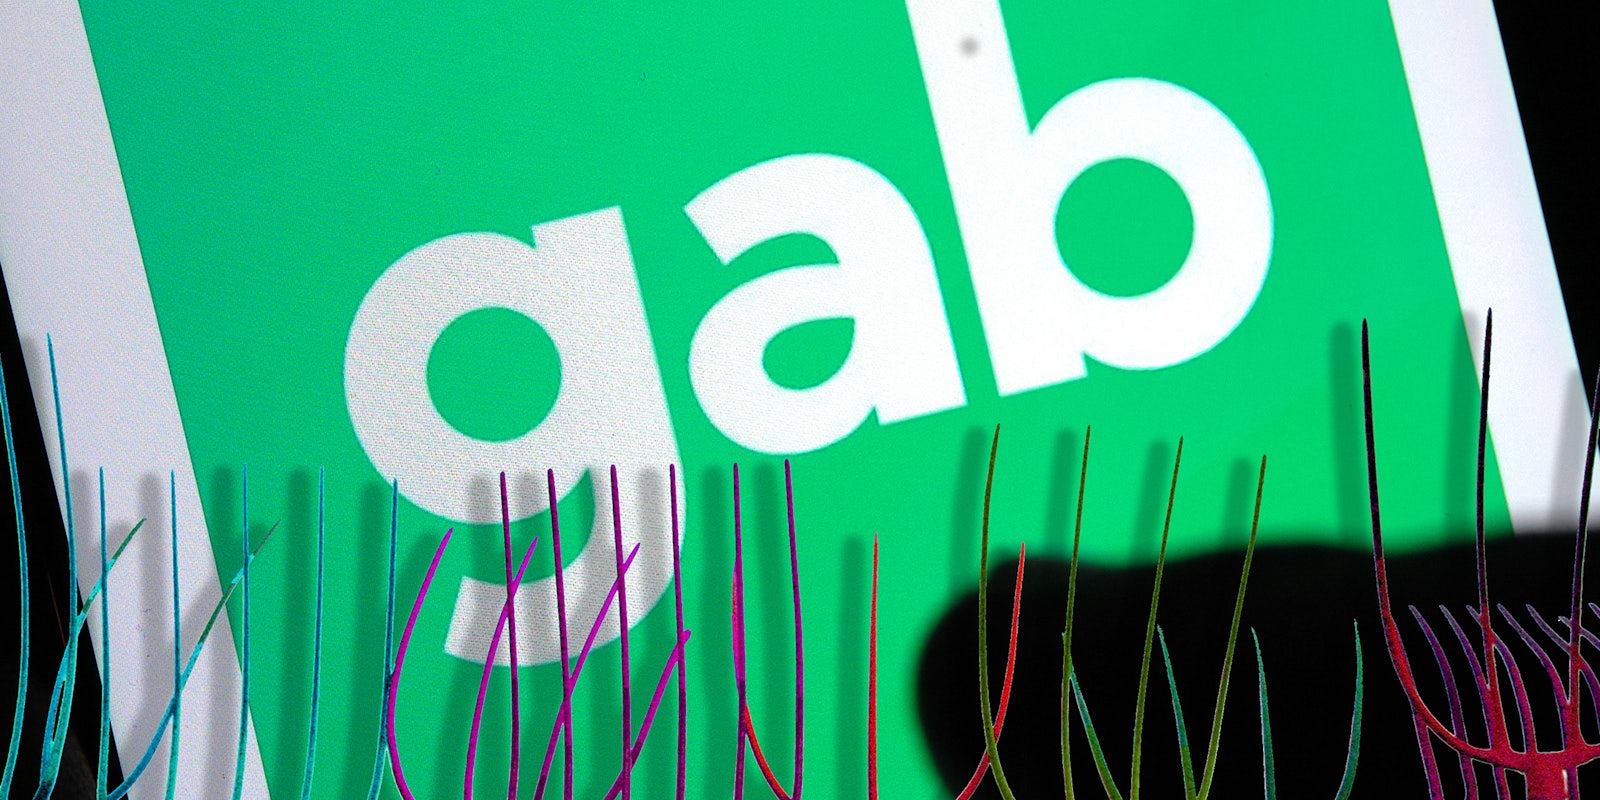 Gab app with pitchforks in front of it